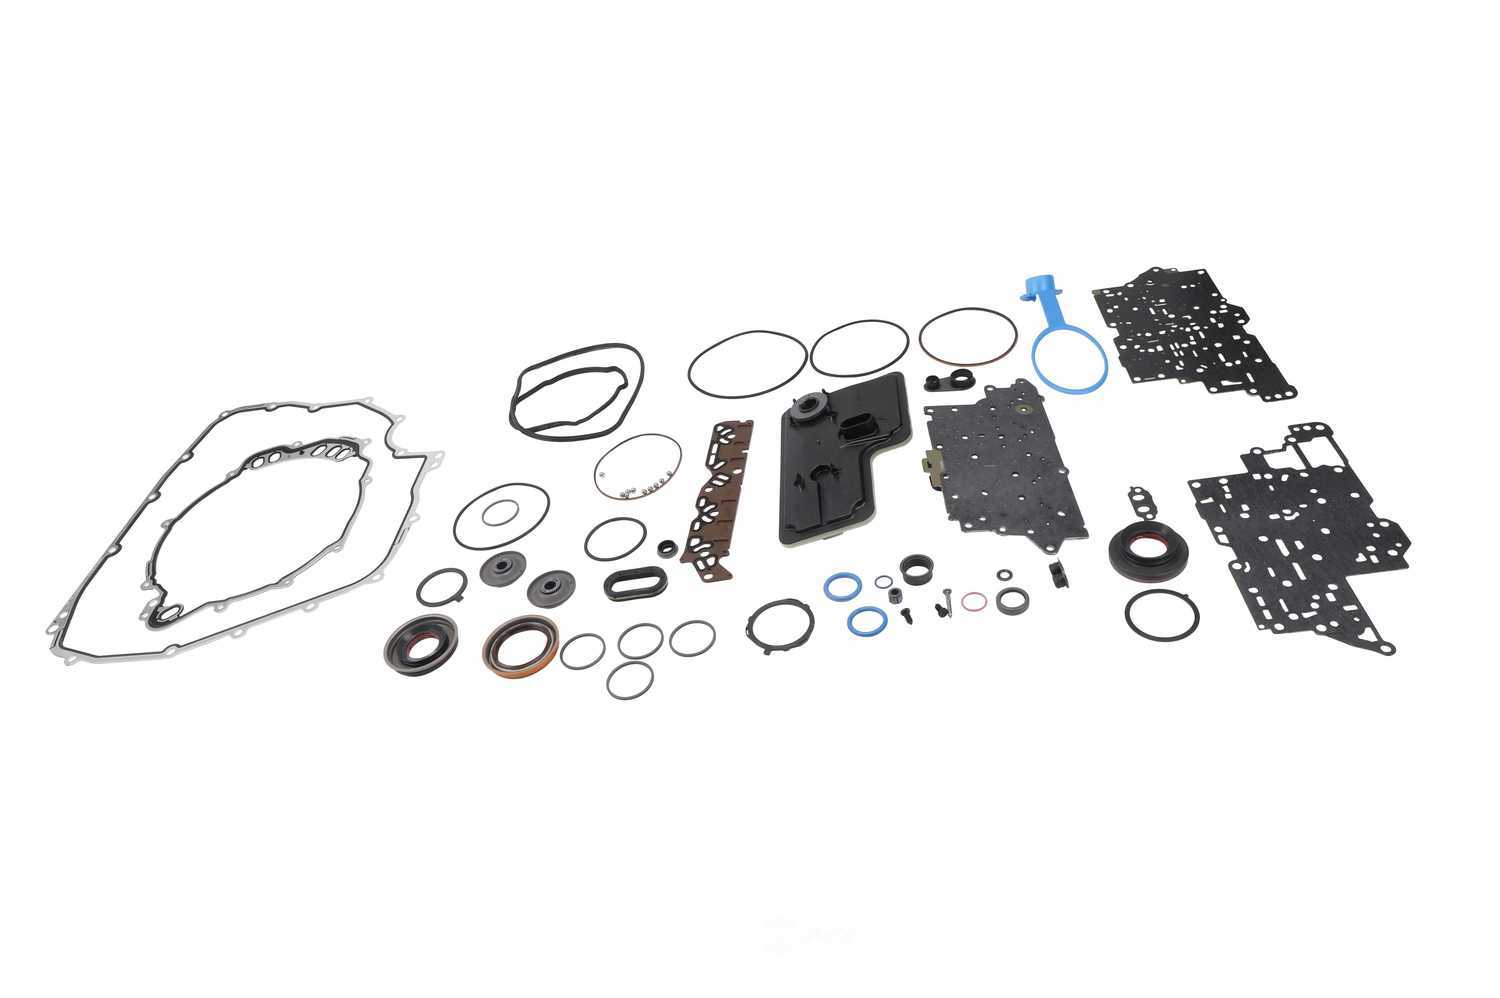 GM GENUINE PARTS - Automatic Transmission Seals and O-Rings Kit - GMP 24276289